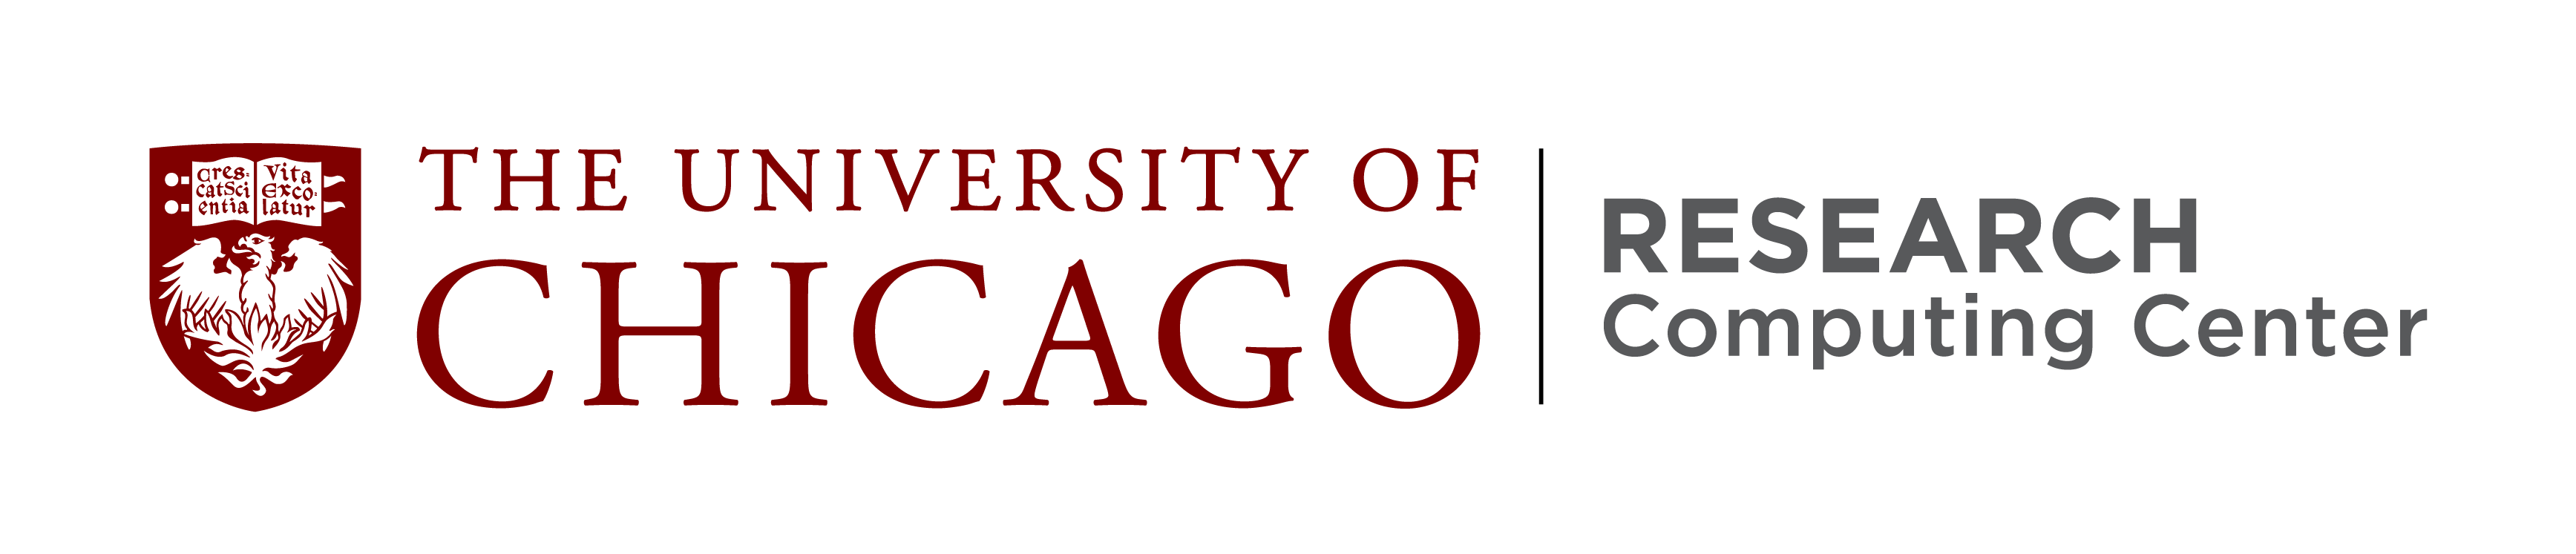 Research Computing Center (RCC) at The University of Chicago